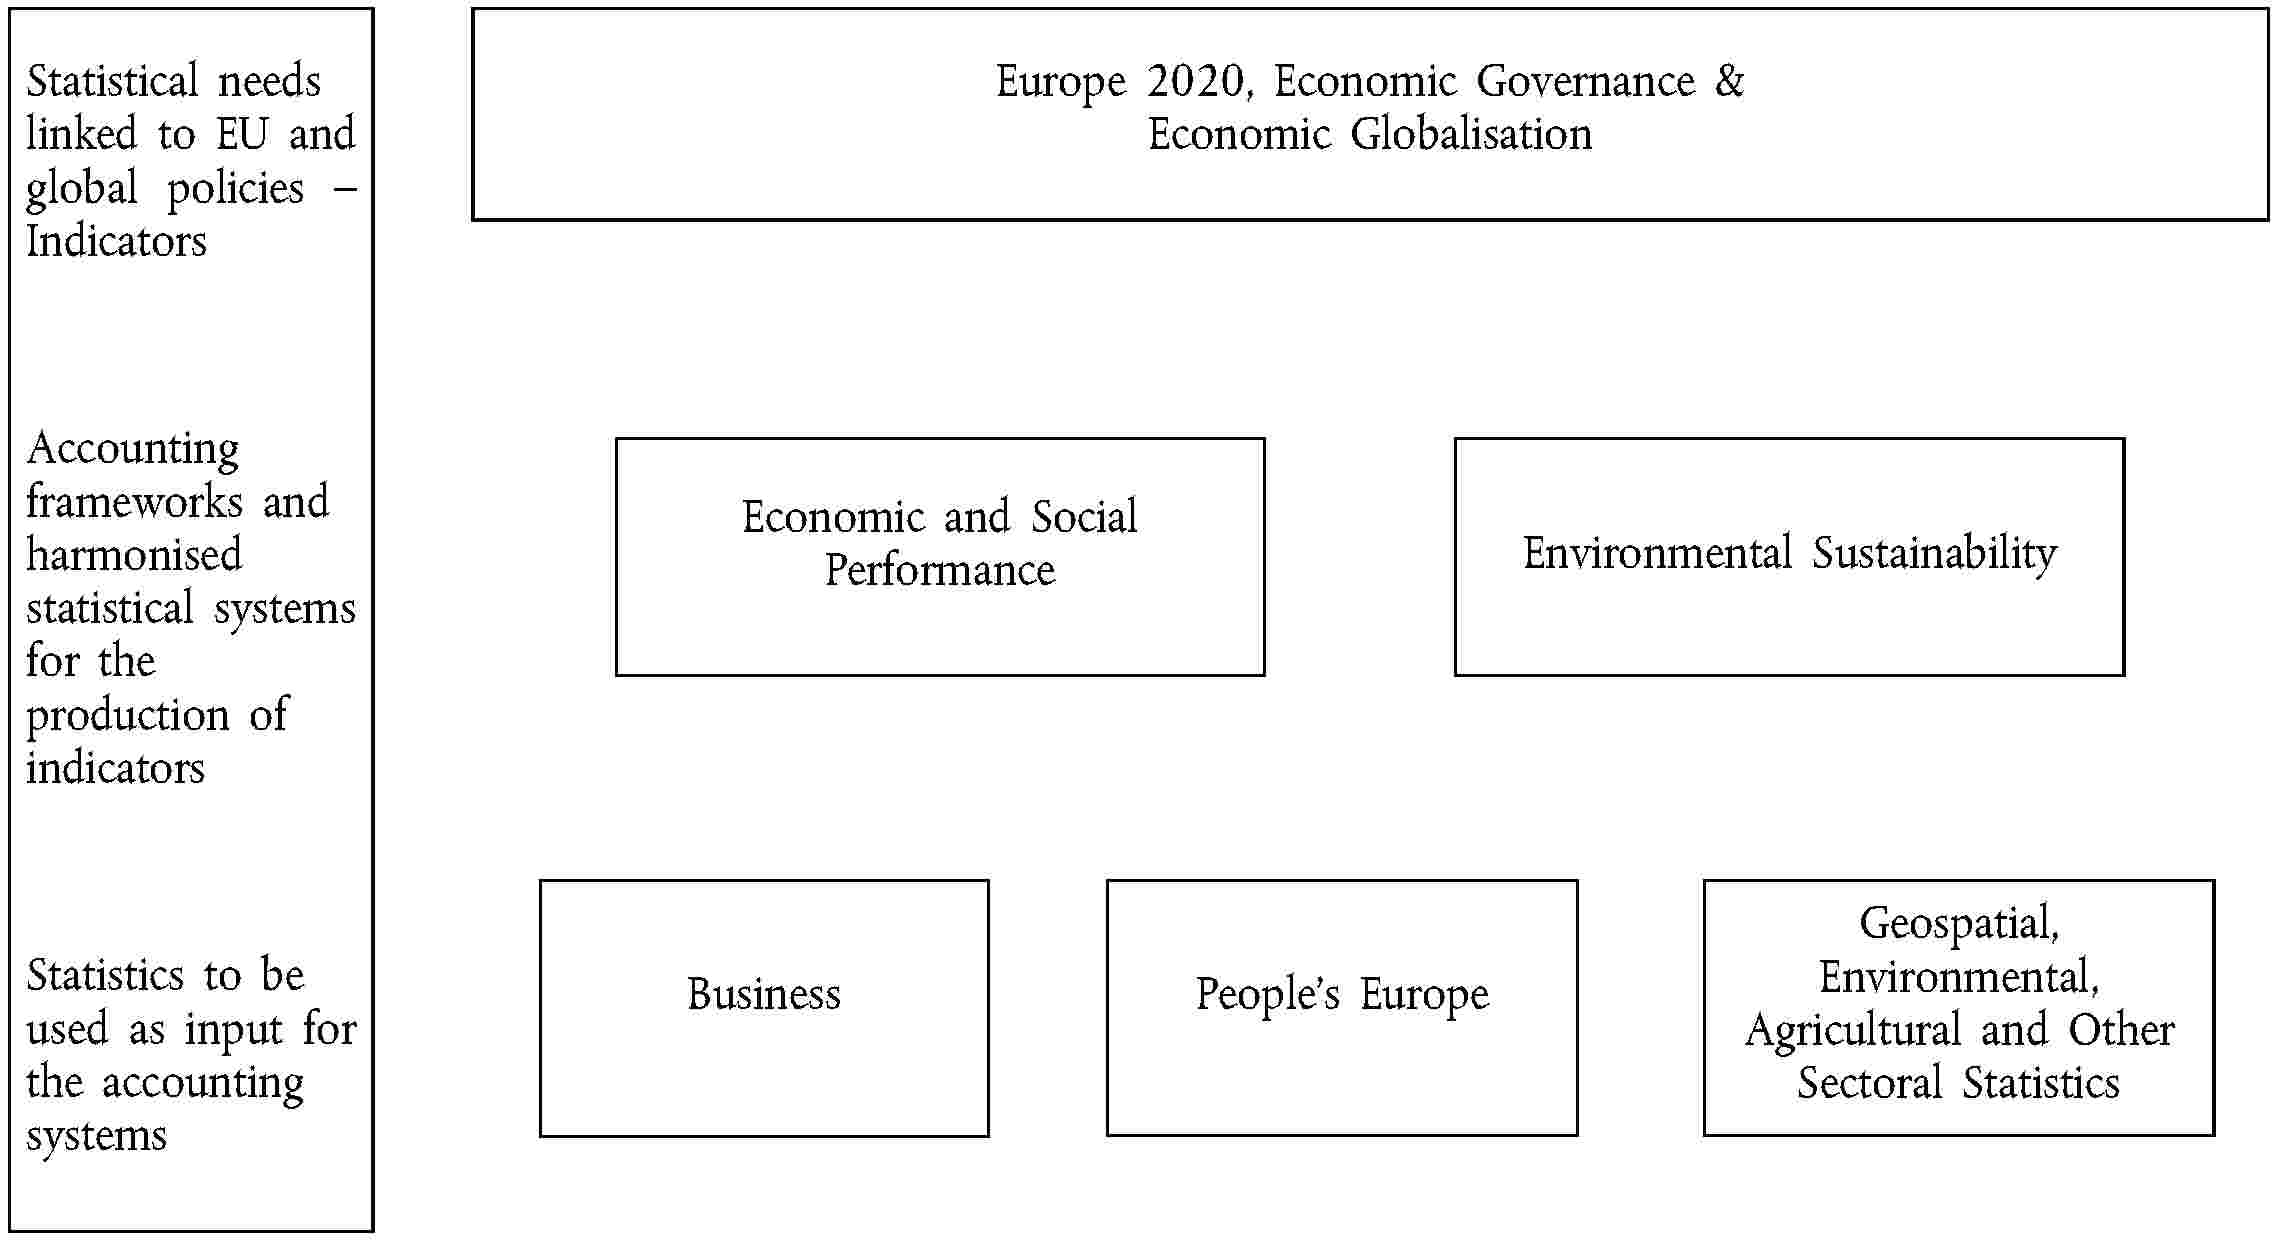 Statistical needs linked to EU and global policies – IndicatorsAccounting frameworks and harmonised statistical systems for the production of indicatorsStatistics to be used as input for the accounting systemsEurope 2020, Economic Governance & Economic GlobalisationEconomic and Social PerformanceEnvironmental SustainabilityBusinessPeople’s EuropeGeospatial, Environmental, Agricultural and Other Sectoral Statistics